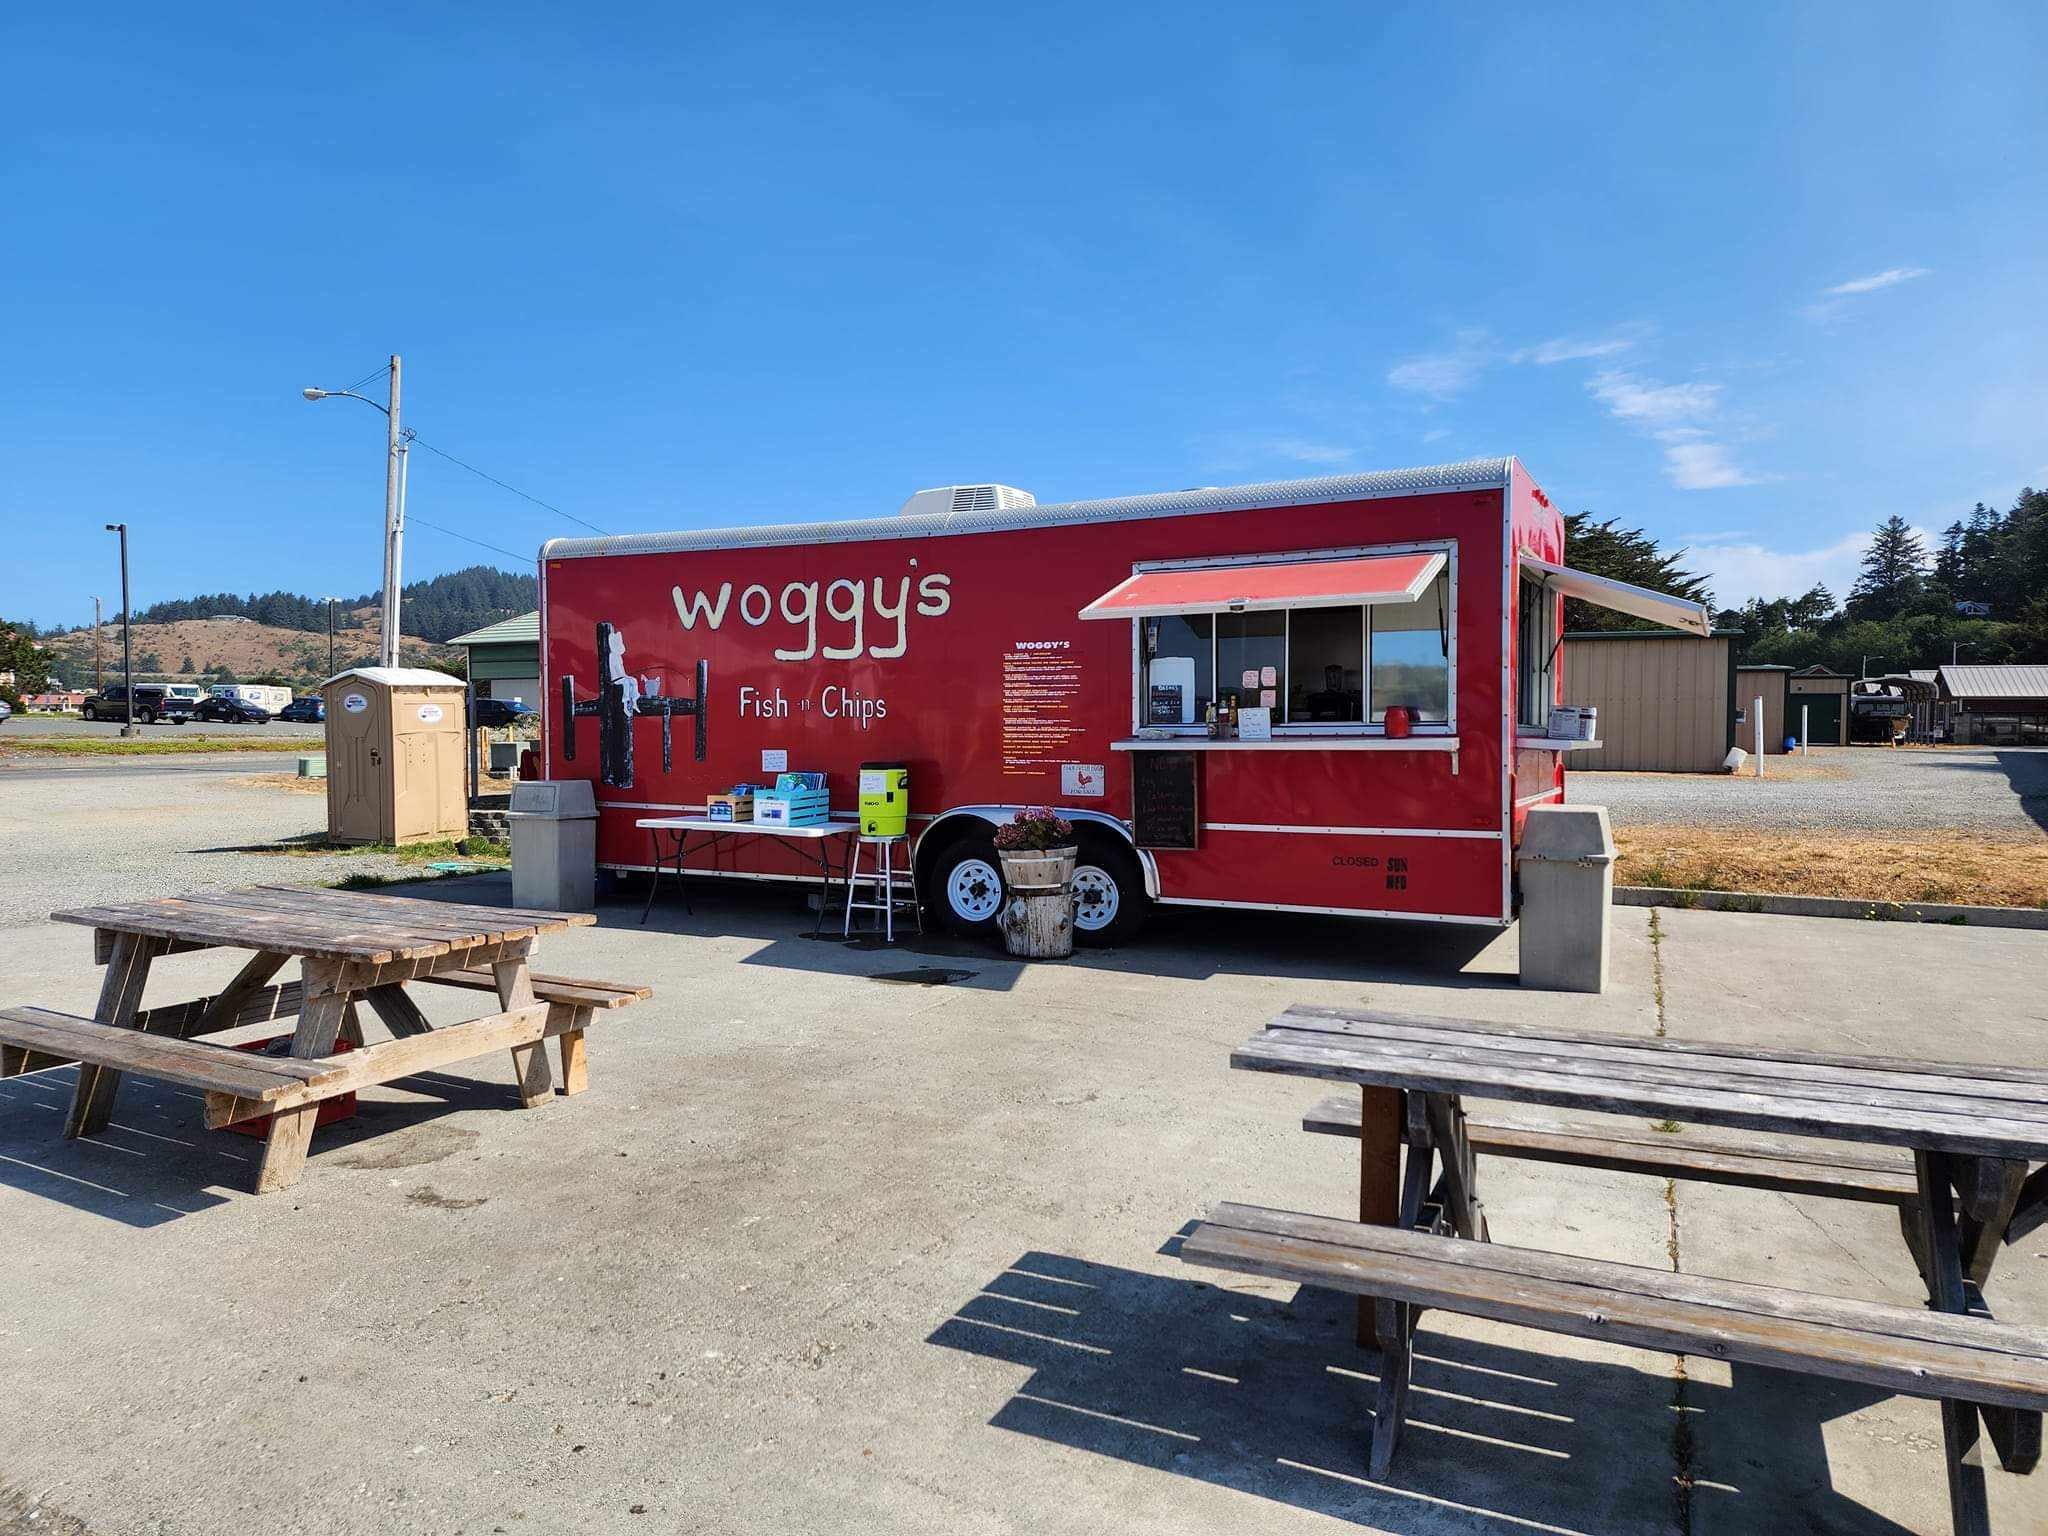 Treat Yourself To Savory Fish & Chips At This Local Favorite Oregon Coast Food Truck